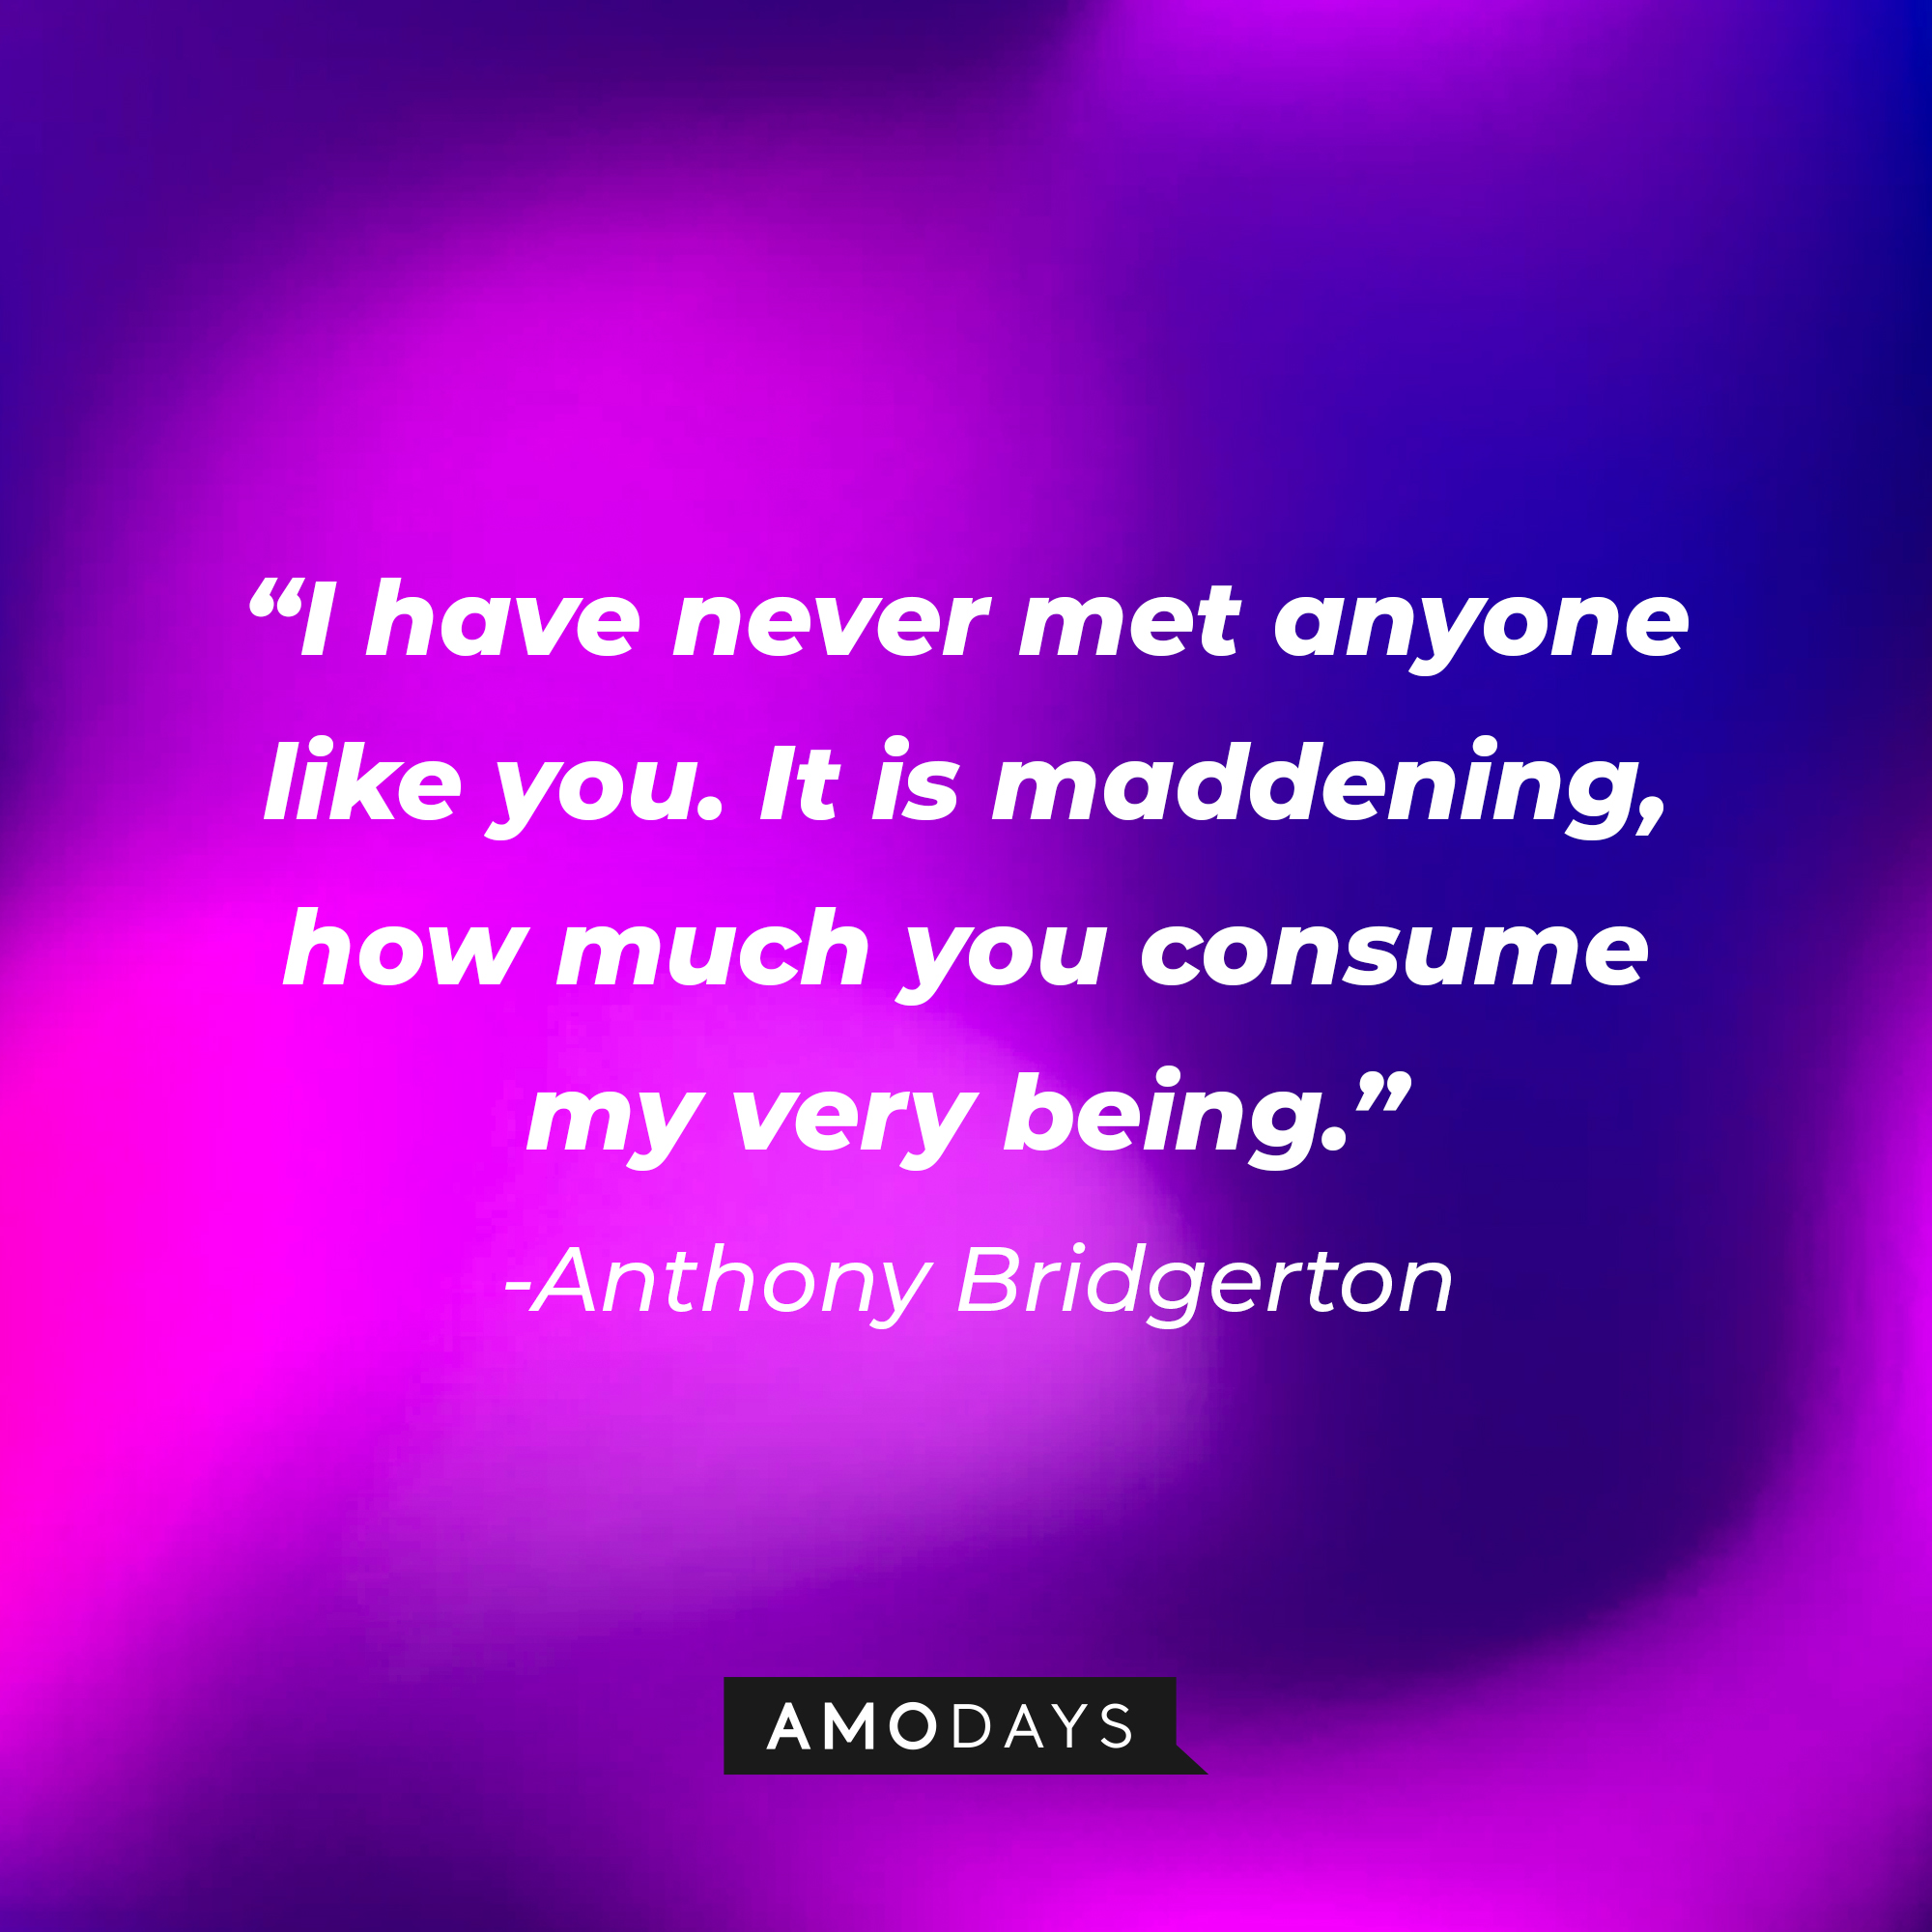 Anthony Bridgerton's quote: "I have never met anyone like you. It is maddening, how much you consume my very being." | Source: AmoDays